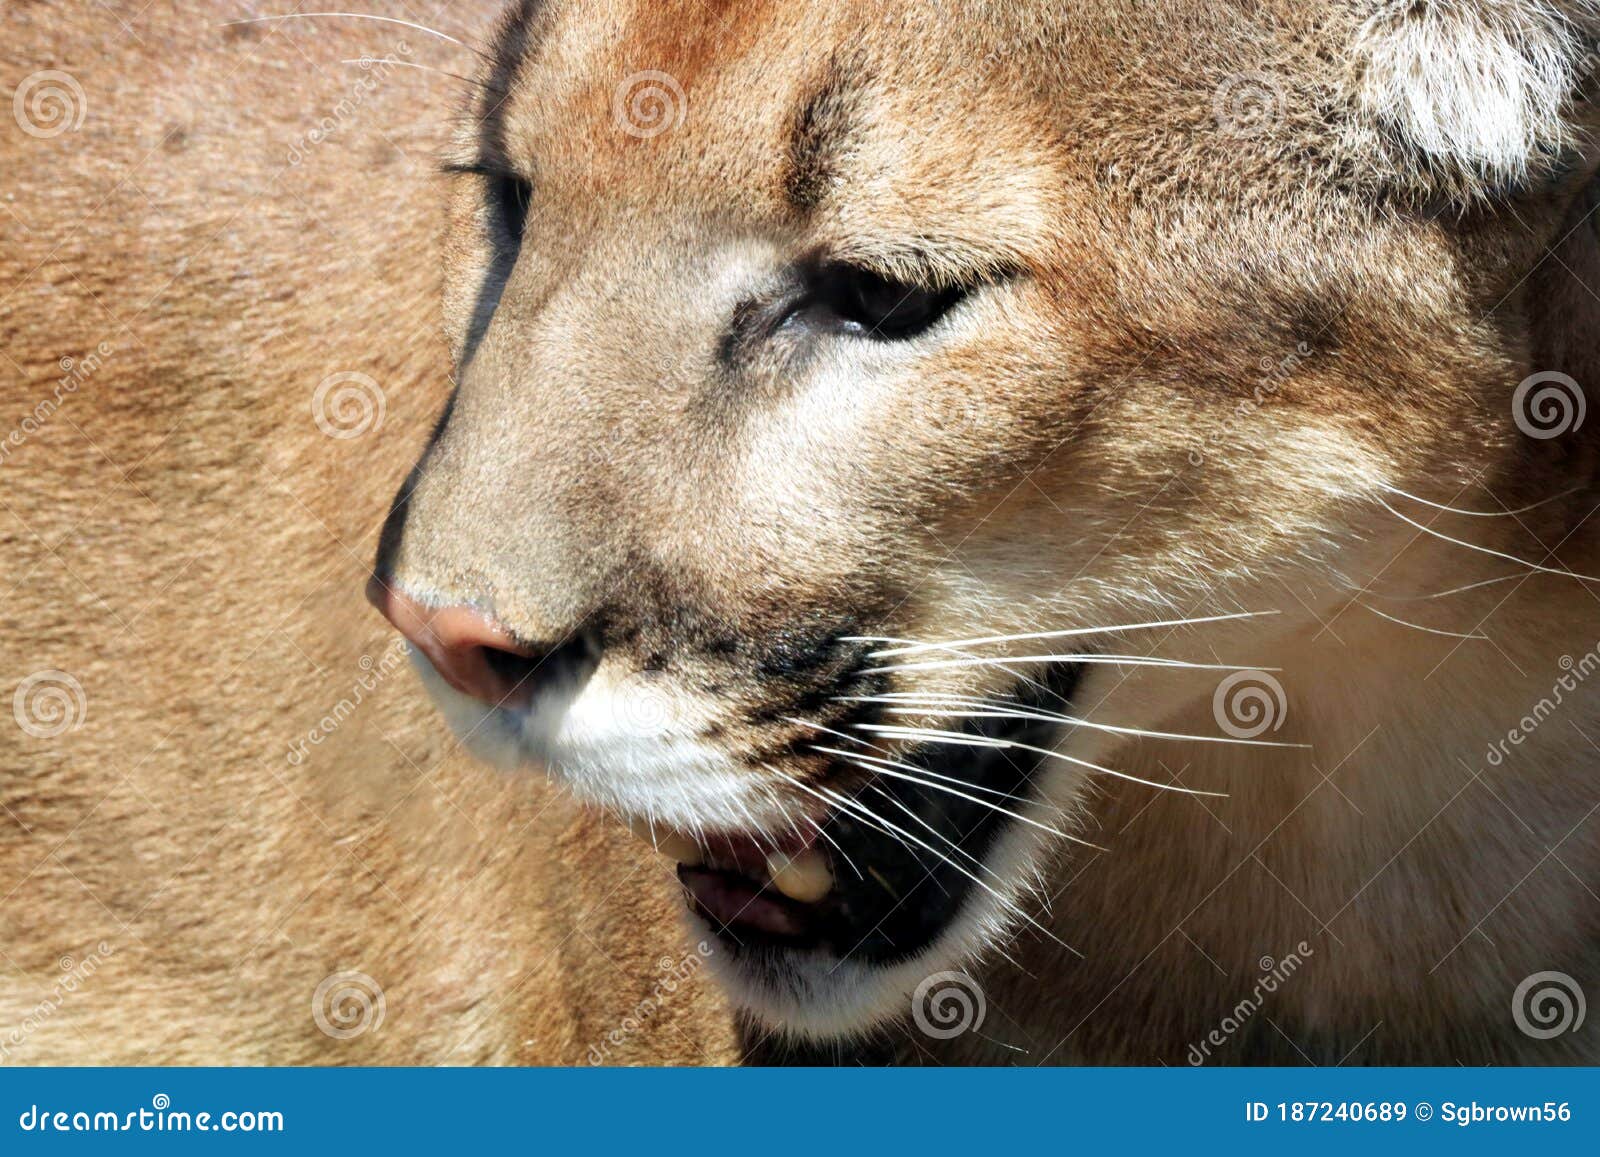 Close Up Head Shot Of A Cougar Or Mountain Lion Stock Image Image Of